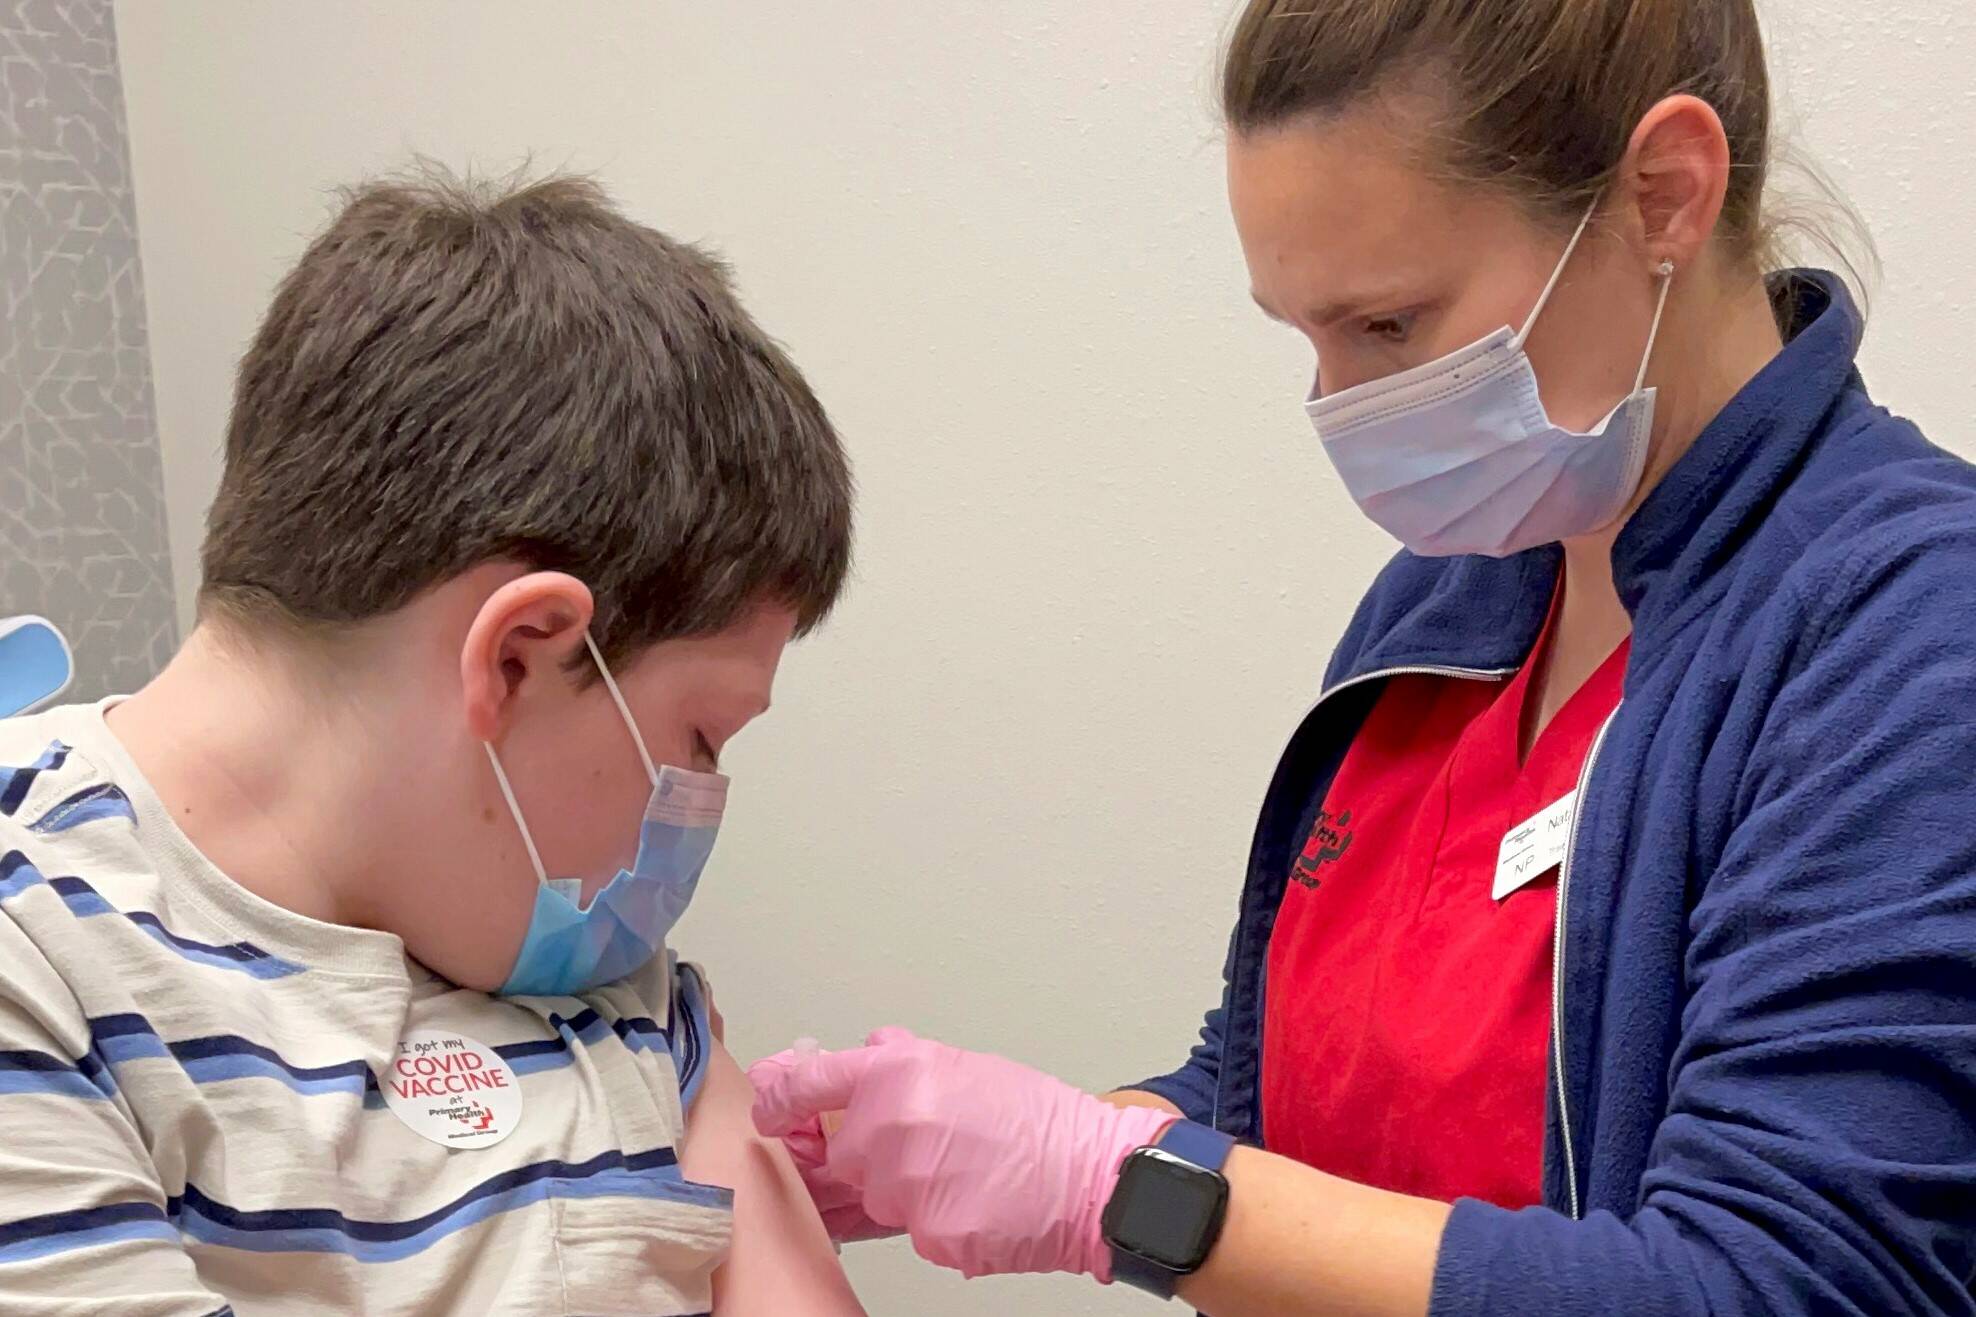 Tracy Morris/Primary Health Medical Group via AP 
In this Wednesday, Nov. 3, 2021, photo provided by Primary Health Medical Group, Ben Weiss, 10, gets a COVID-19 vaccine at Primary Health Medical Group in Meridian, Idaho.